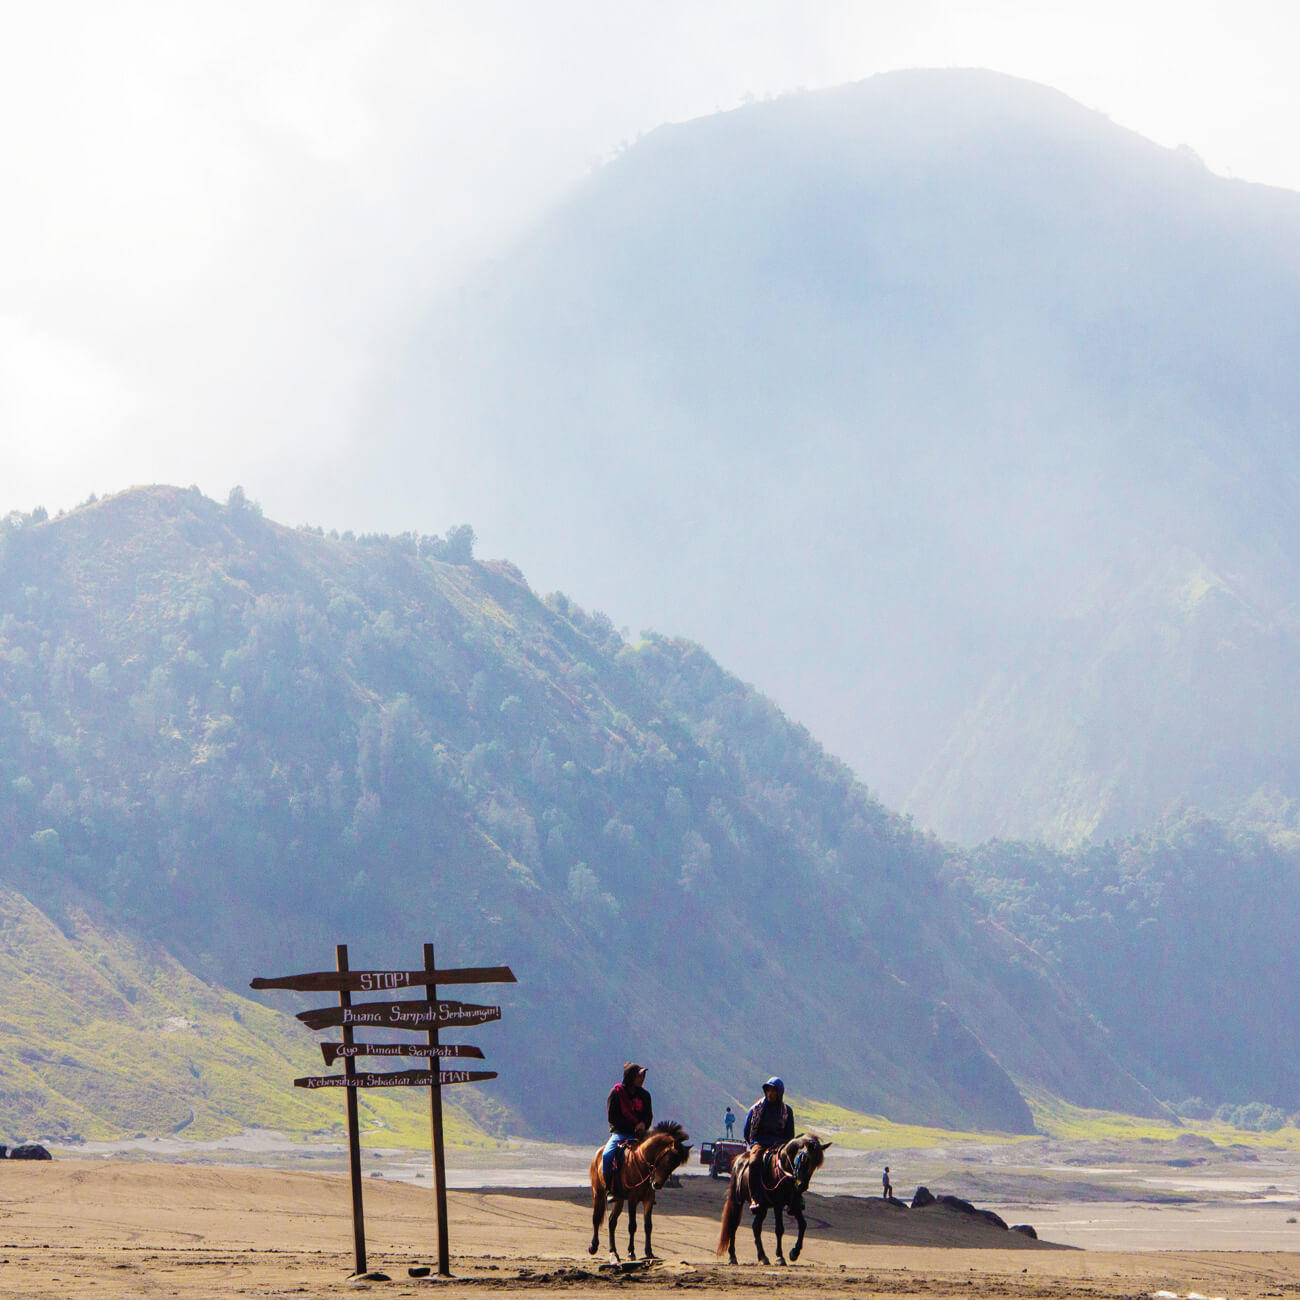 Two figures on horseback against an indonesian mountainous backdrop.